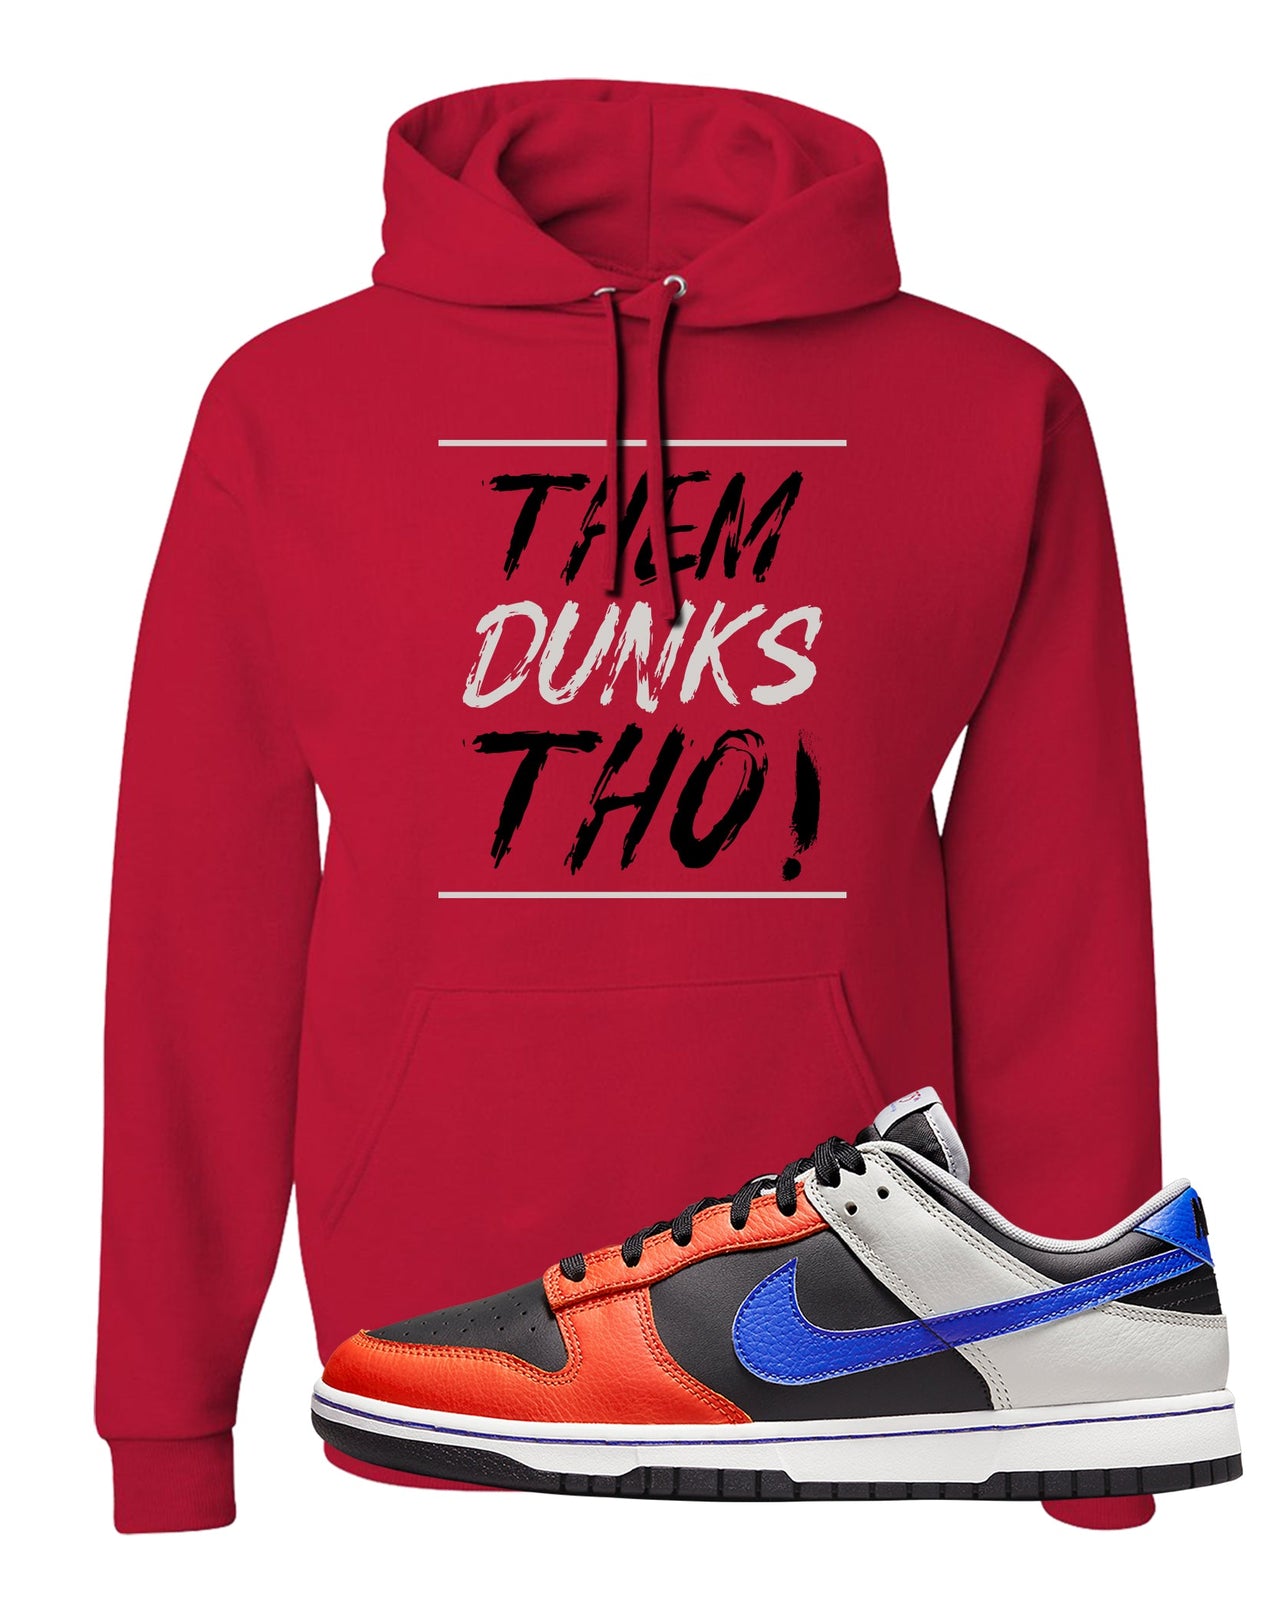 75th Anniversary Low Dunks Hoodie | Them Dunks Tho, Red